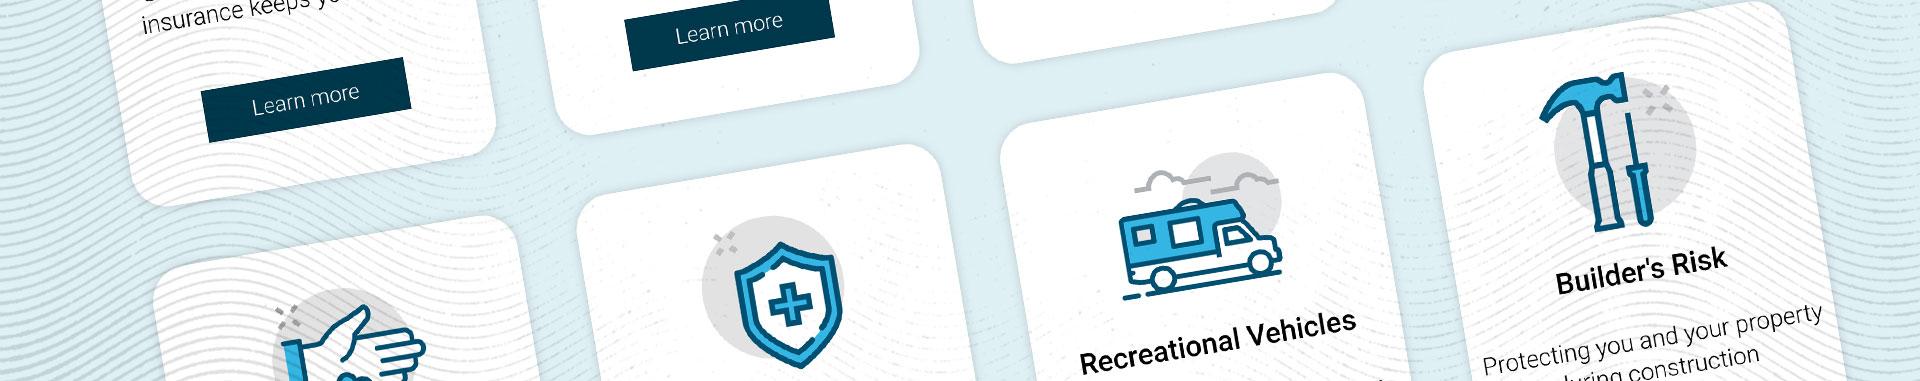 Panoramic snapshot of cards with icons and learn more buttons from The Insurance Center website